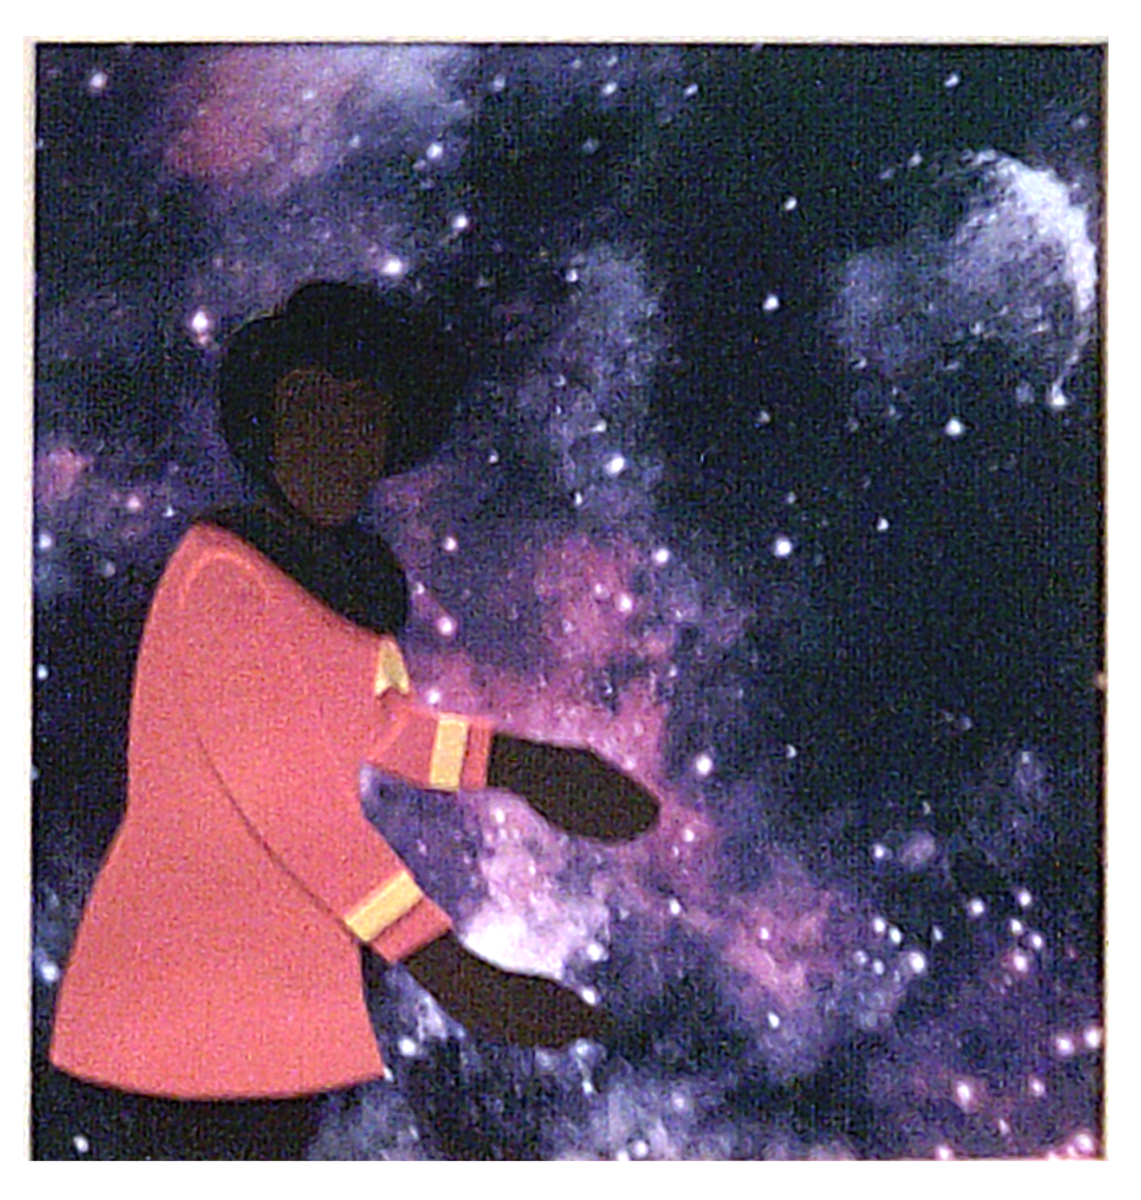 A painting depicting the silhouette of Uhura - a black woman in a red Starfleet uniform - set against a purple galaxy.